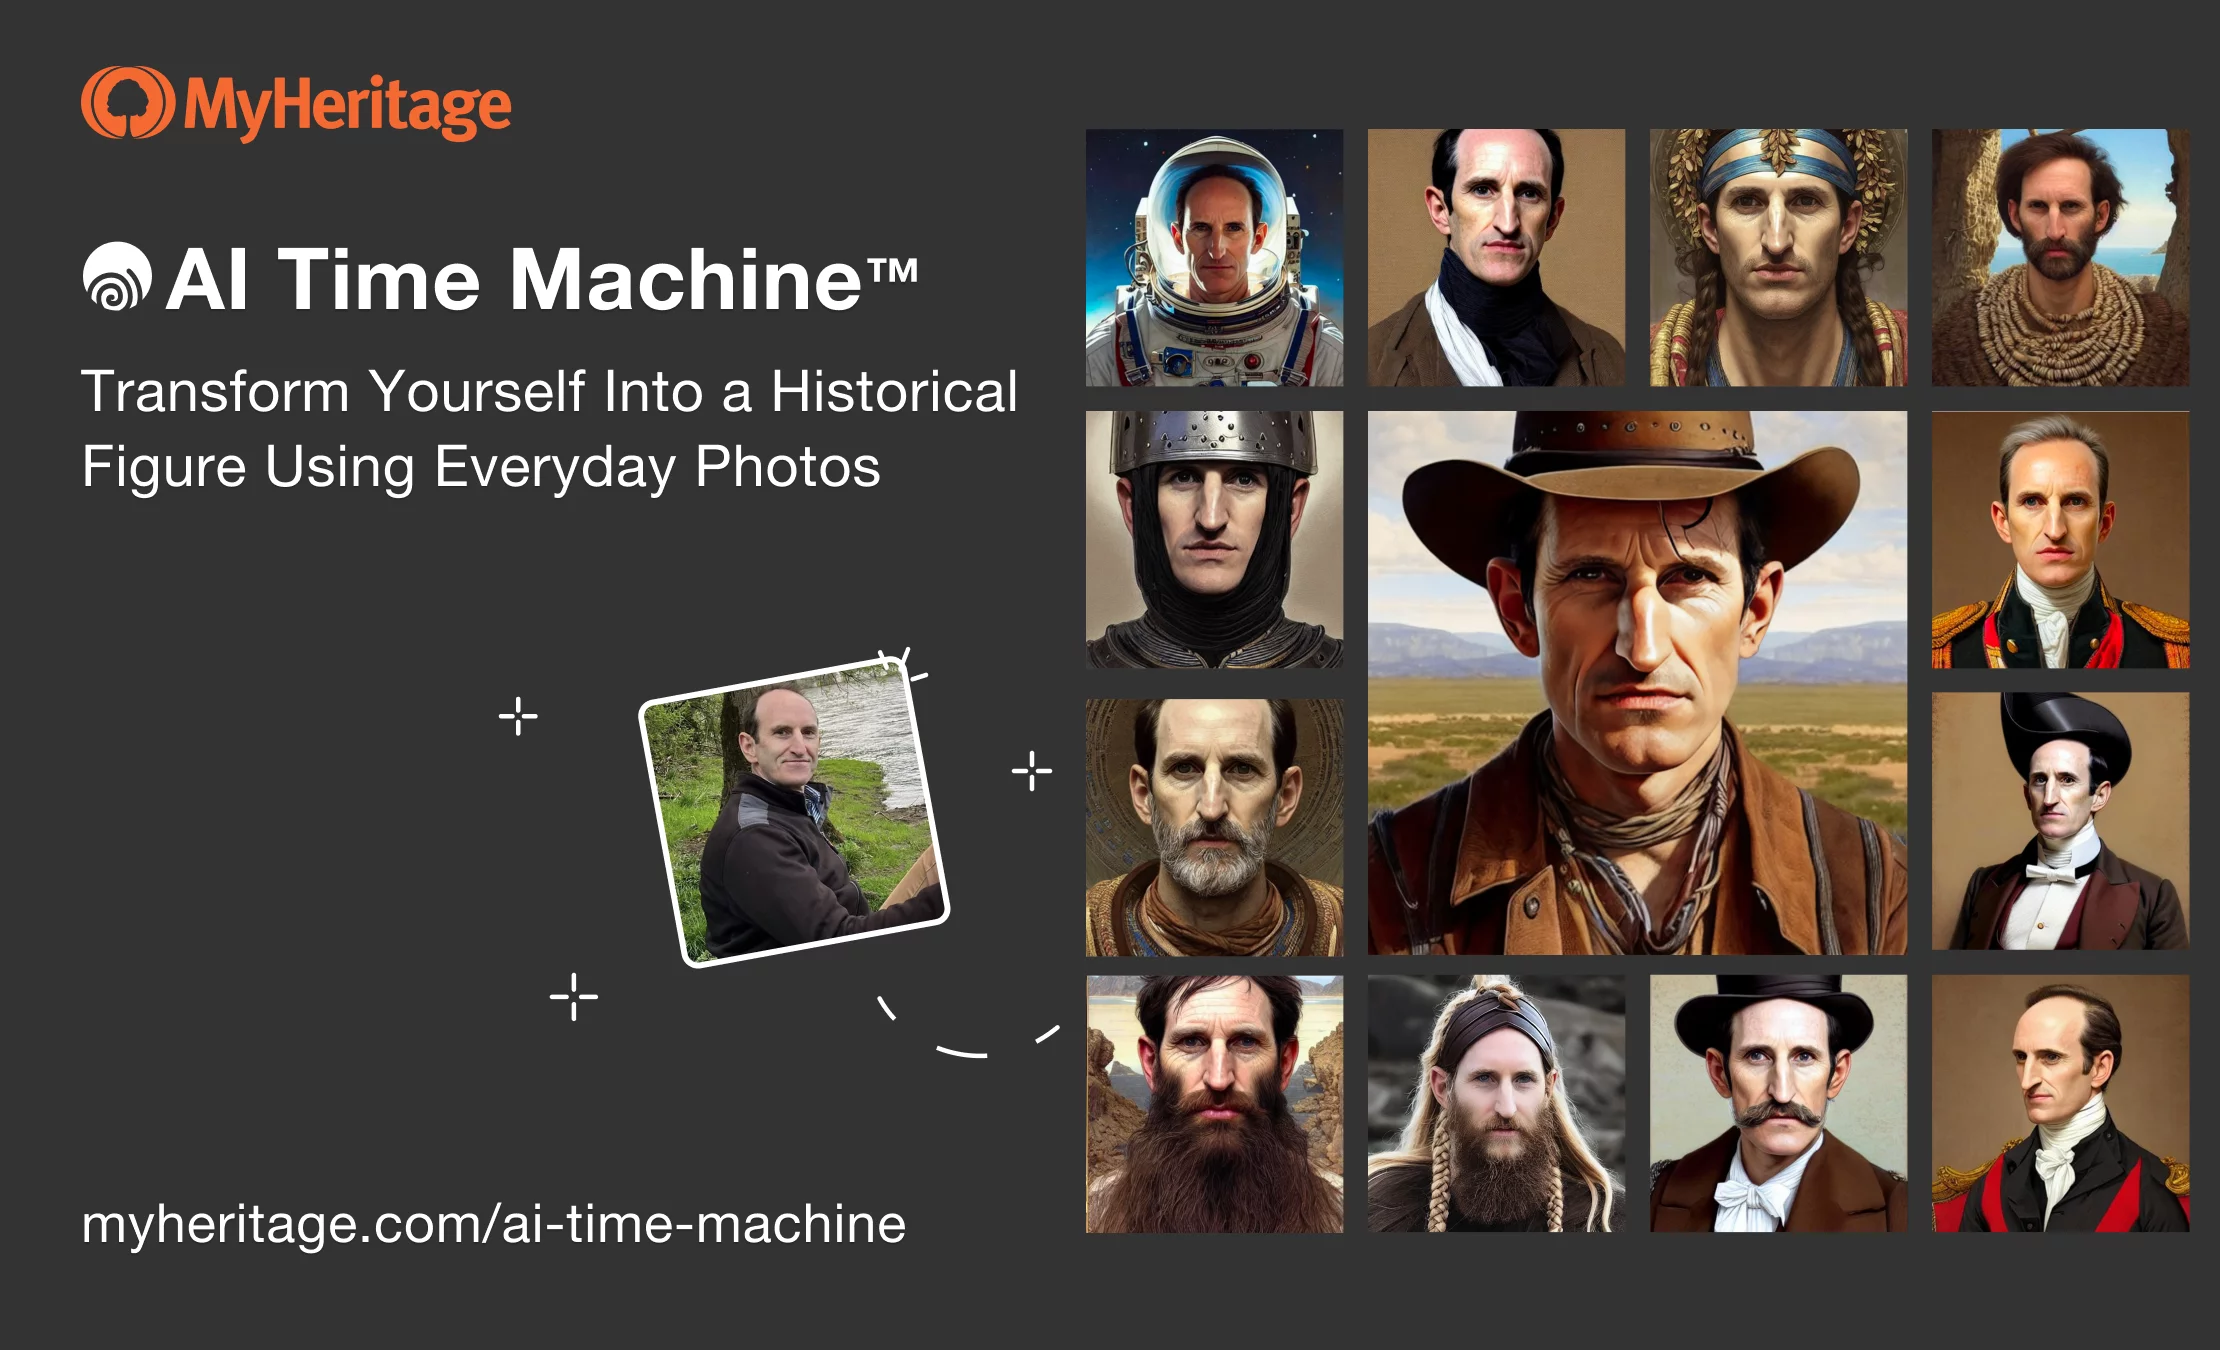 Achieving Great Results with MyHeritage’s AI Time Machine™